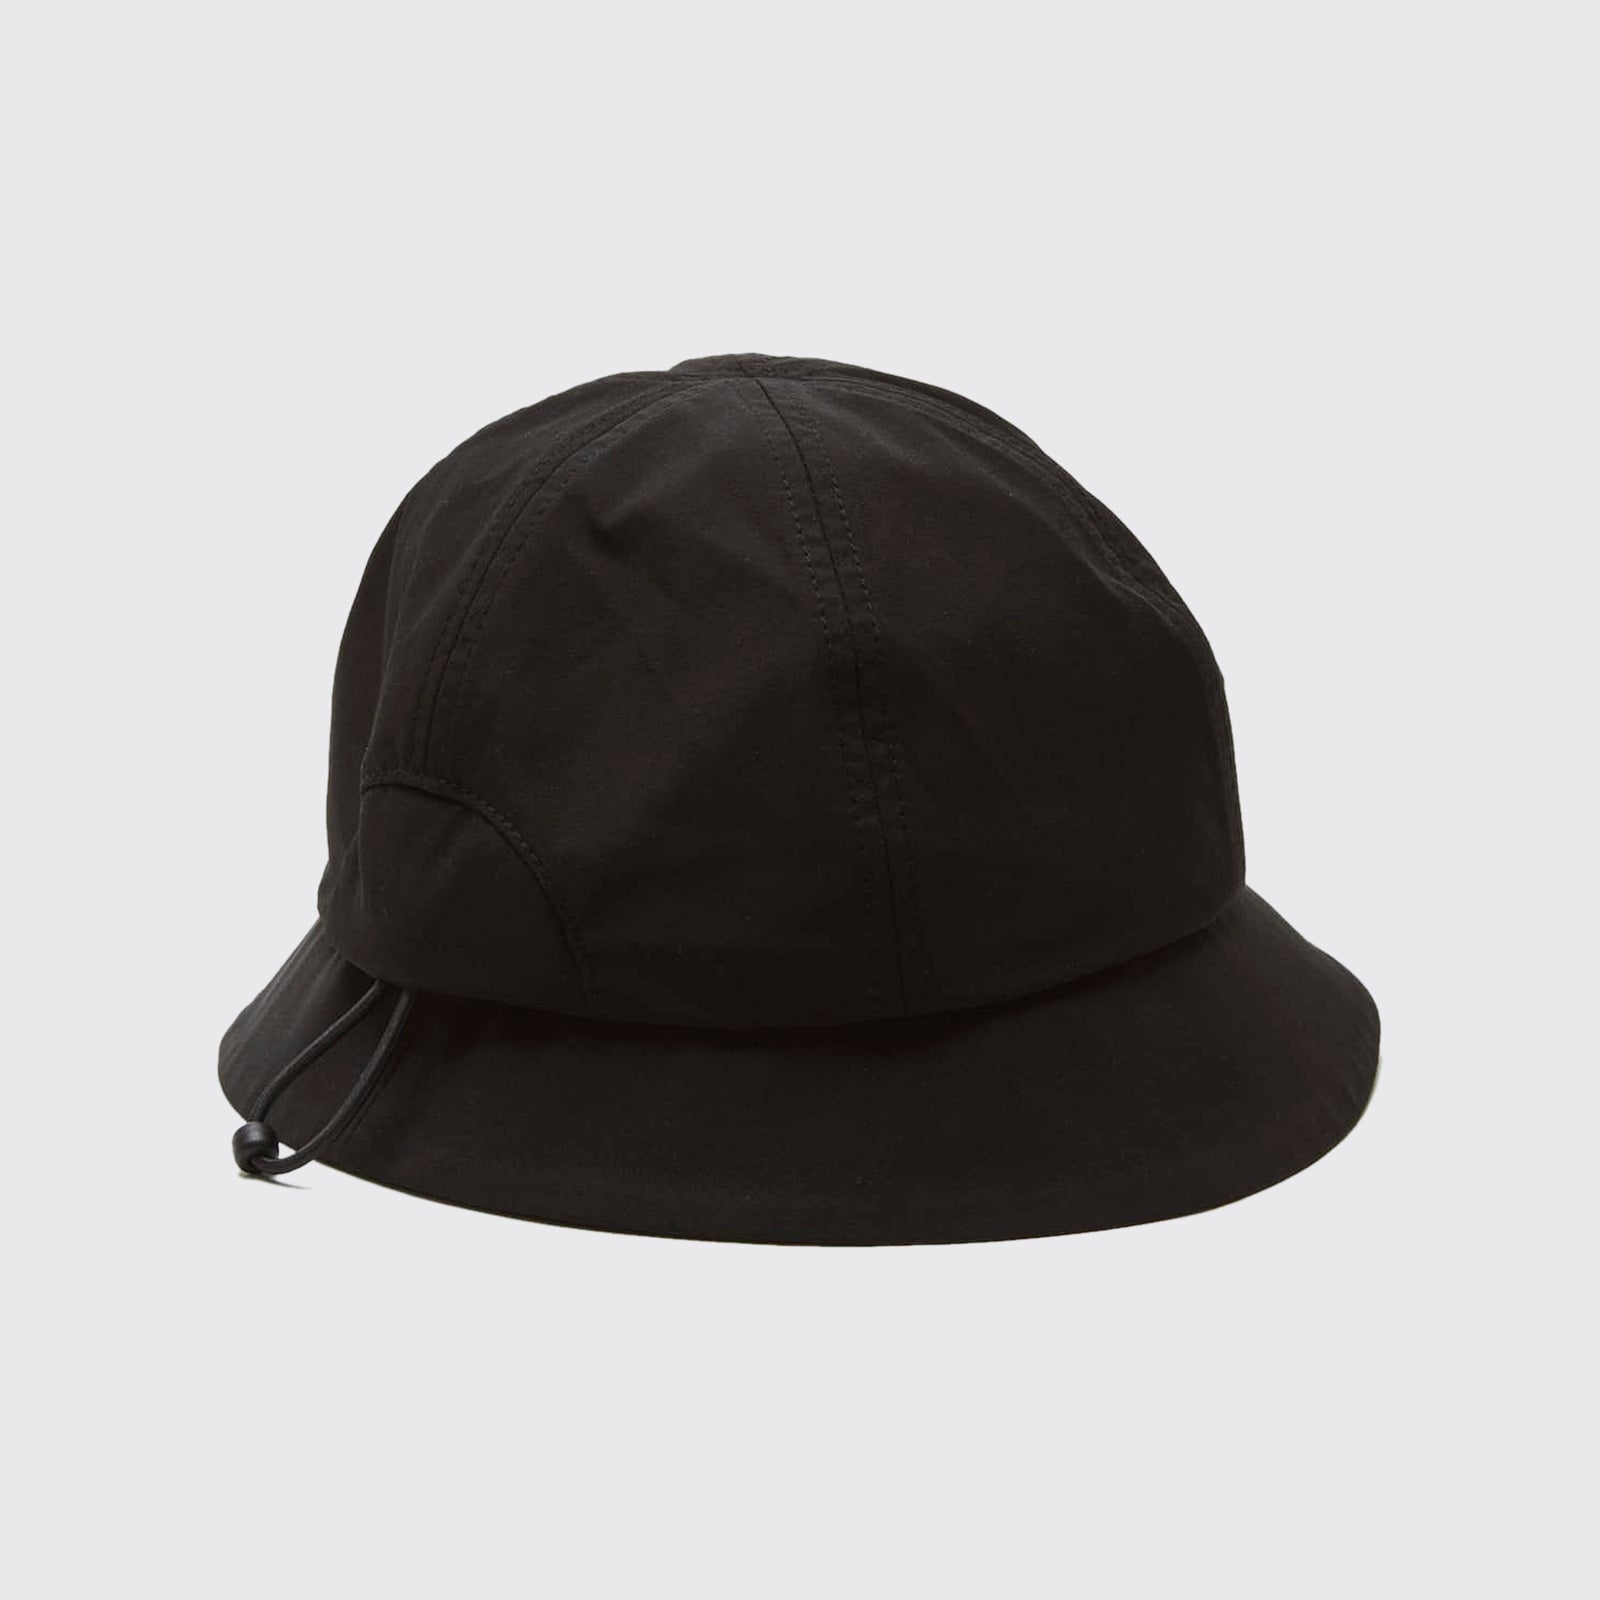 BAL/WILDTHINGS STRETCH BELL HAT (Black)